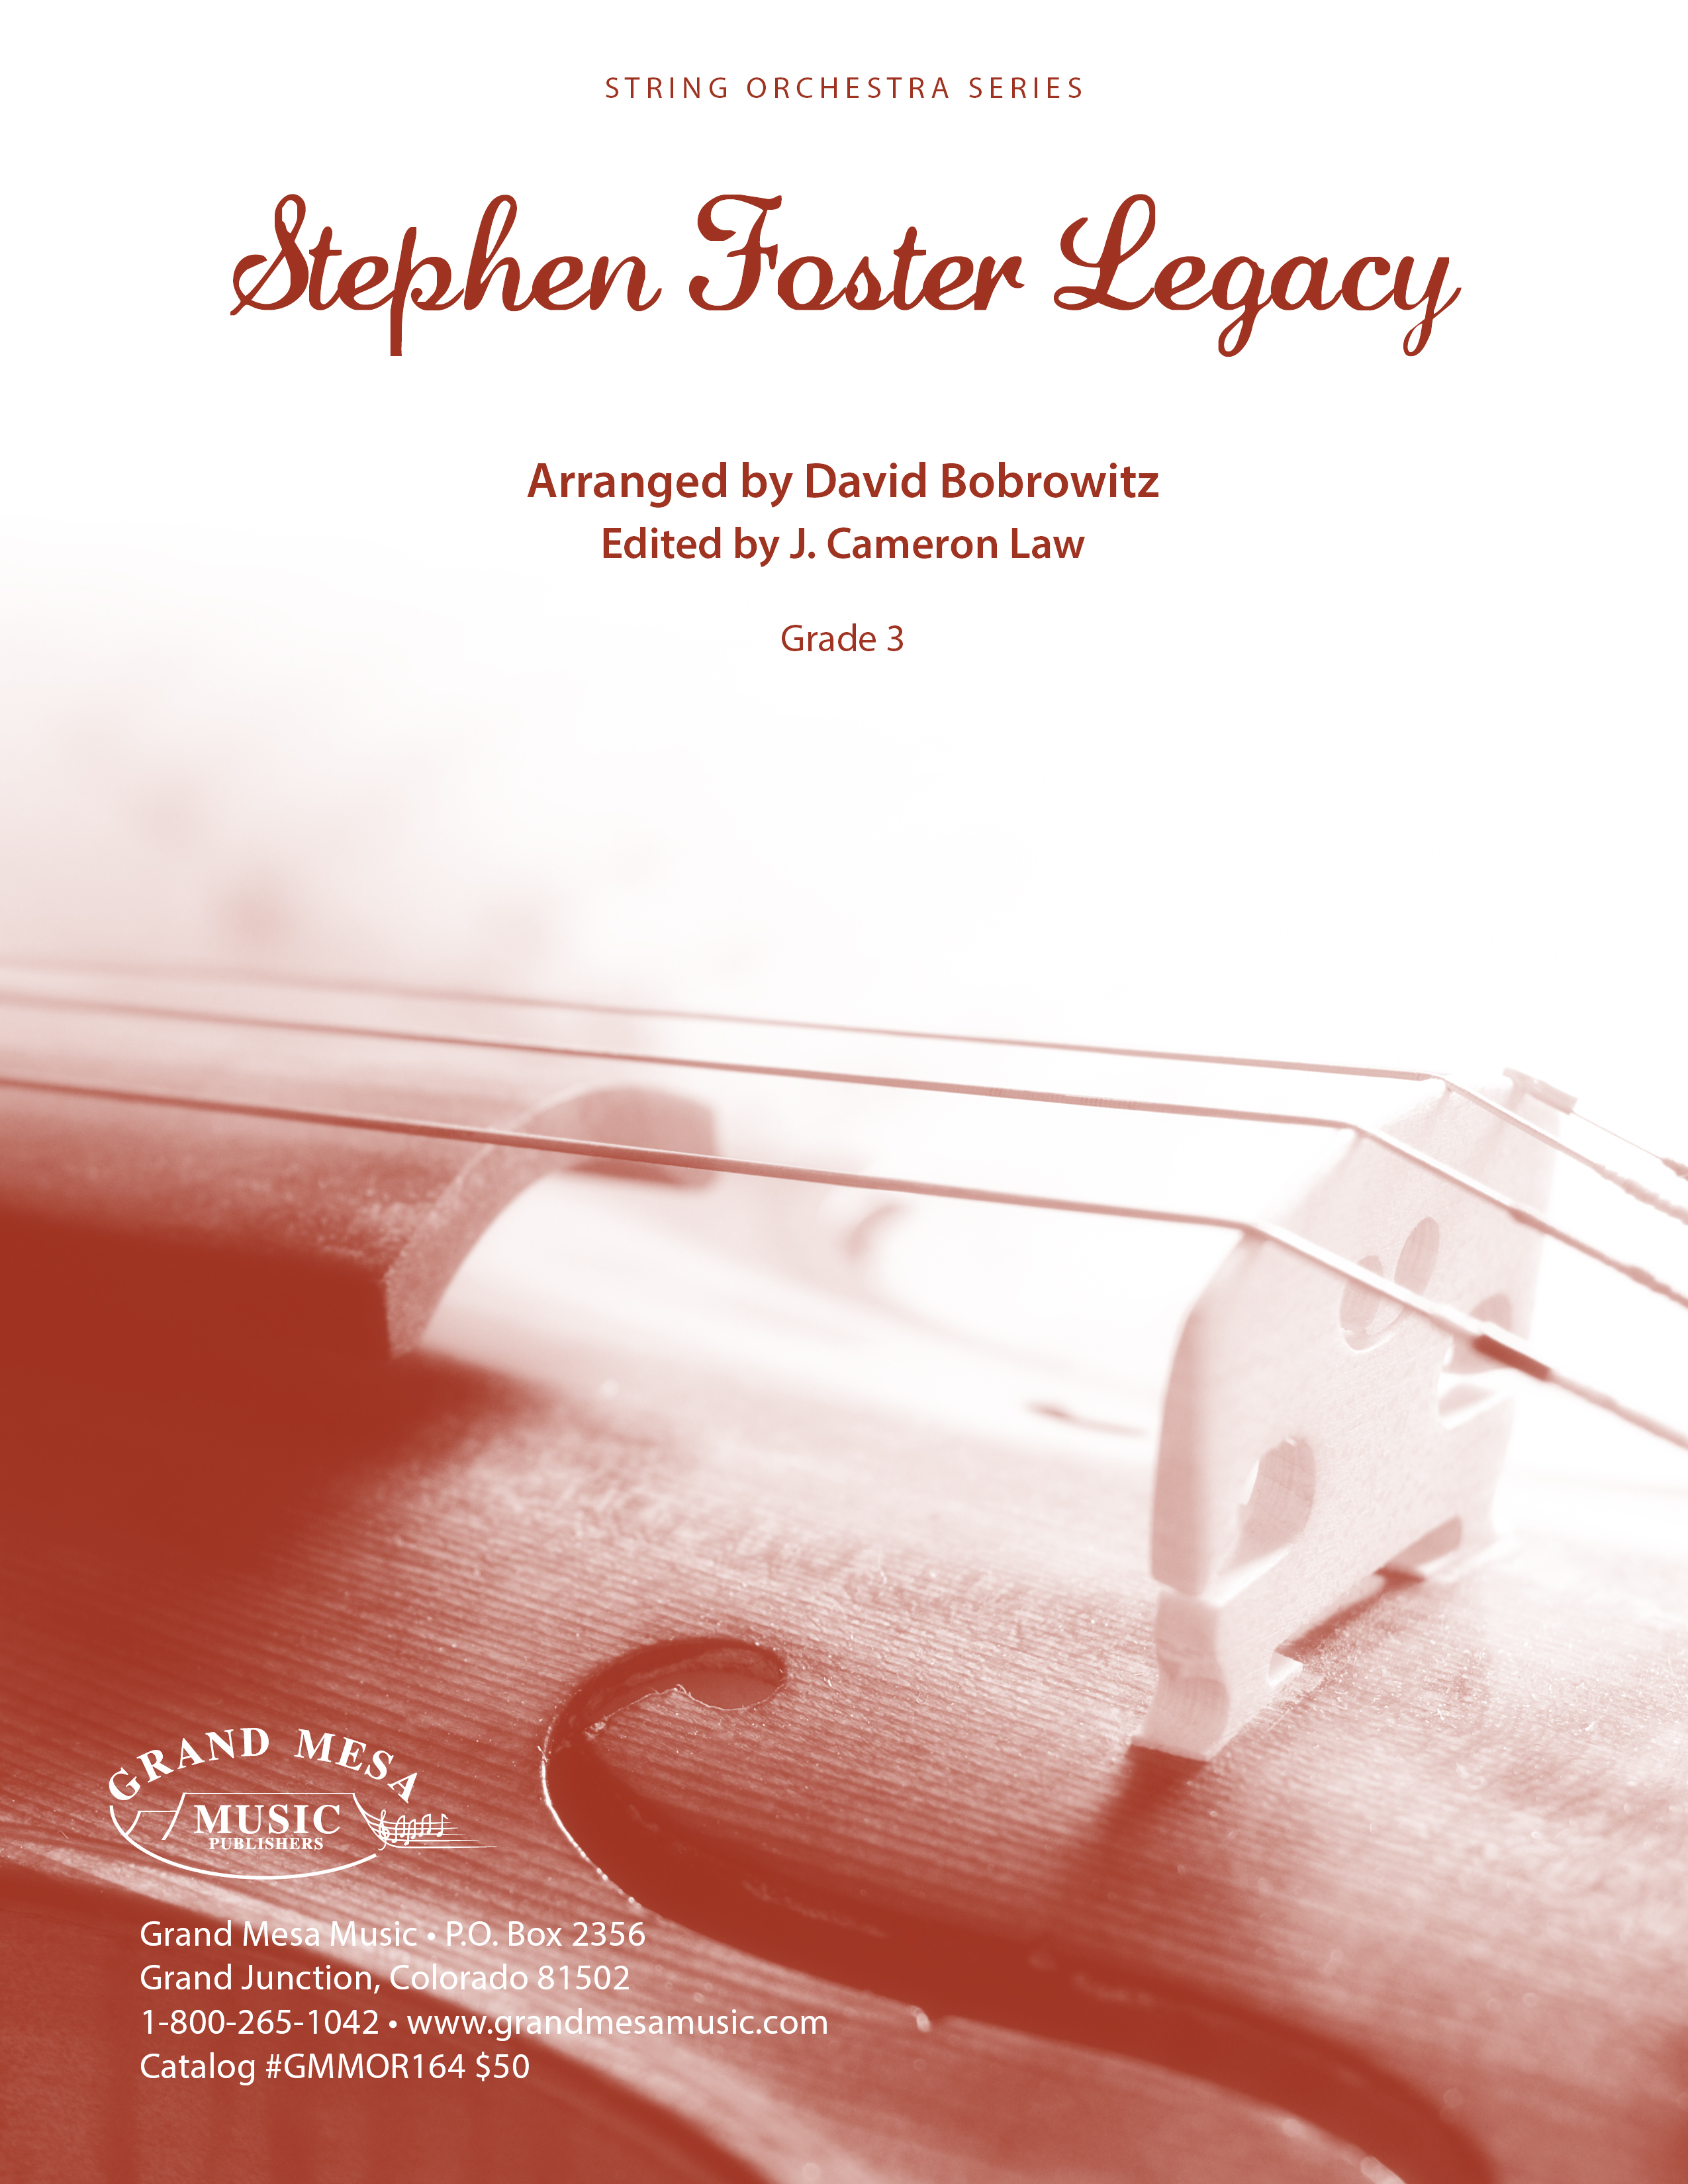 Stephen Foster Legacy